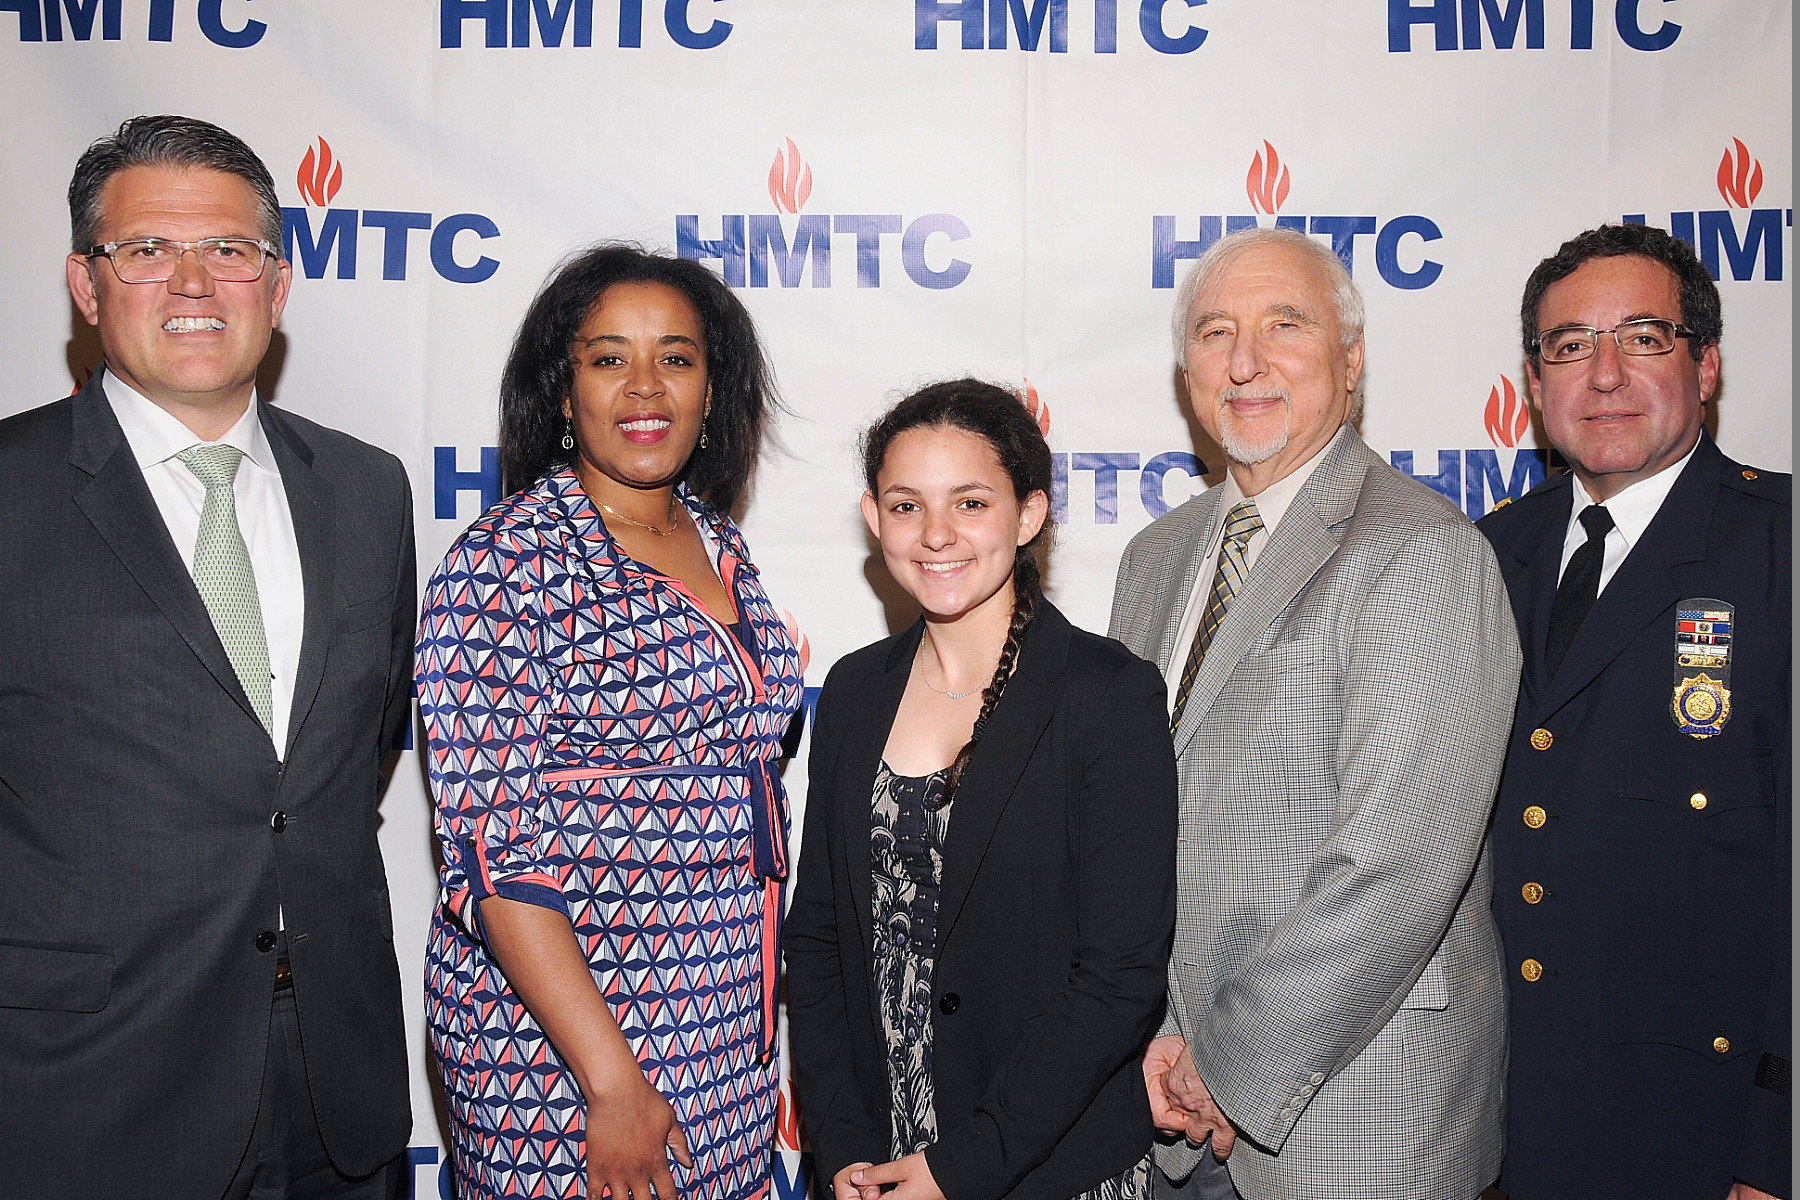 Hewlett High sophomore Sophie Riegel won an Upstander Award from the Holocaust Memorial & Tolerance Center of Nassau County. From left were Peter Klein, Claire Friedlander Family Foundation, Tracy Garrison-Feinberg, director of the Claire Friedlander Education Institute; Riegel, Steven Markowitz, chairman of the HTMC; and NCPD Deputy Inspector Alan Hirsch.